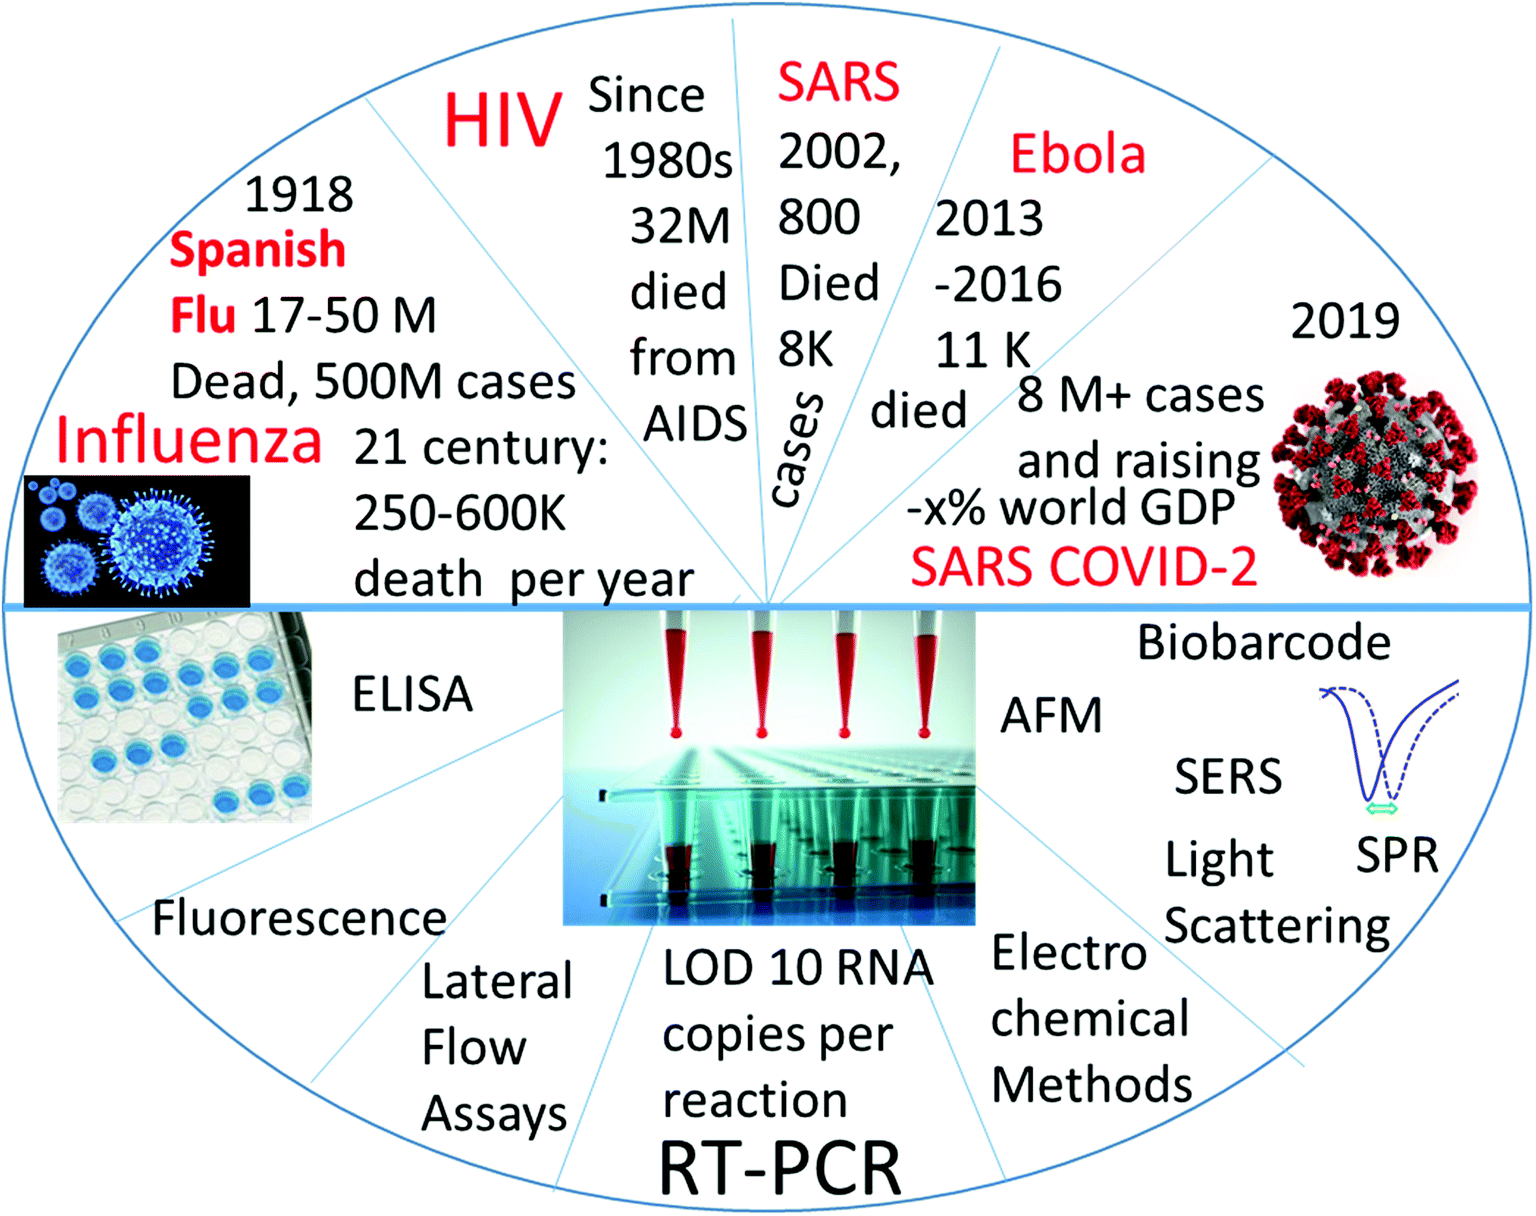 Detection of RNA viruses from influenza and HIV to Ebola and SARS-CoV-2 ...